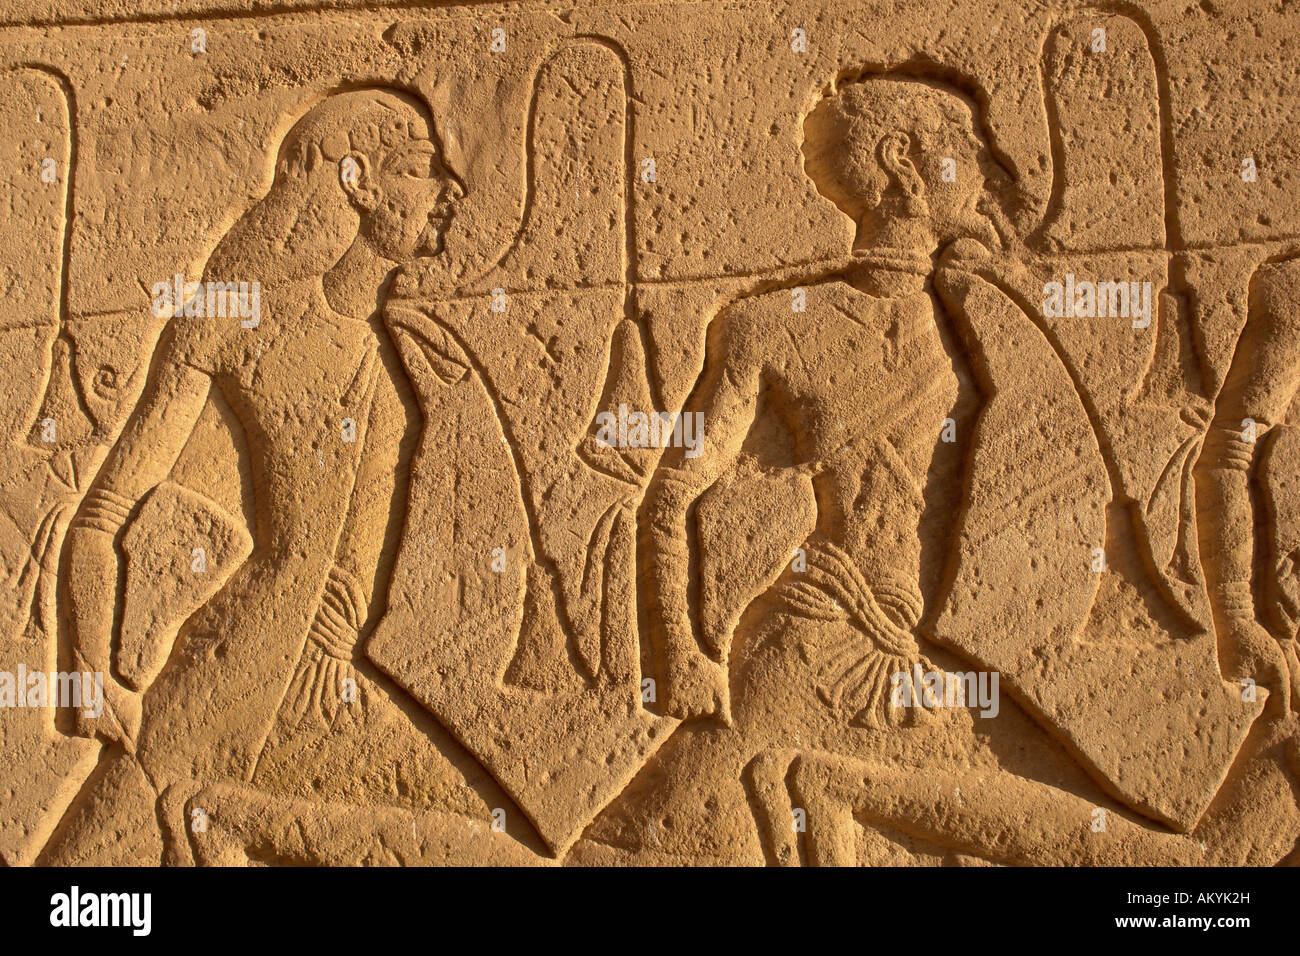 Ramses temple - Legends about the hero acts of the King, Abu Simbel, Egypt Stock Photo